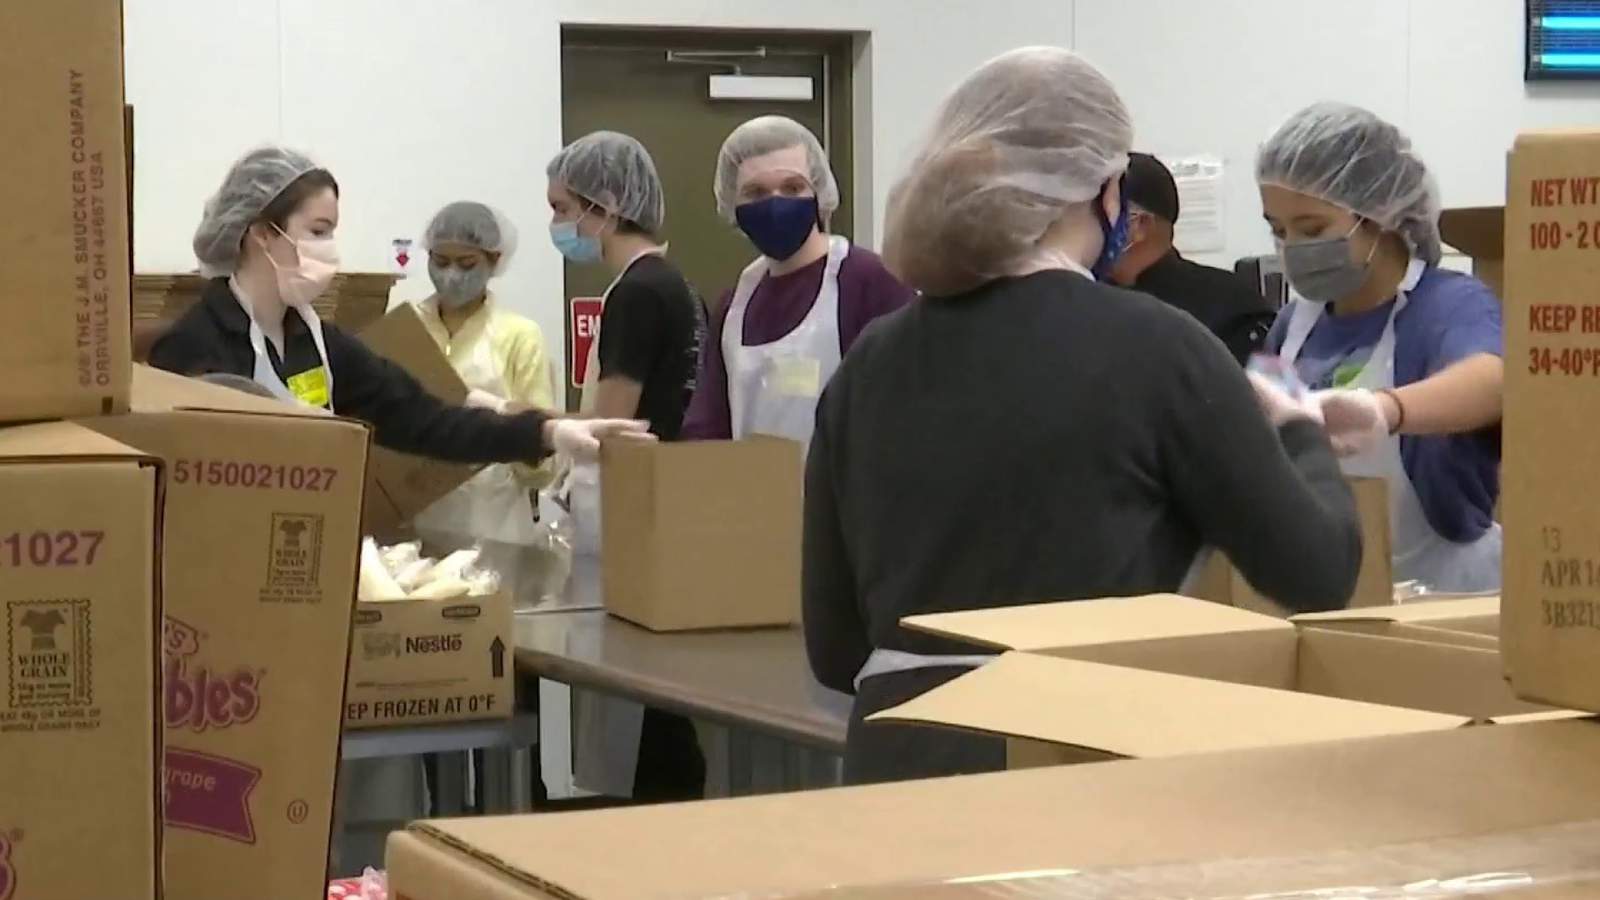 Mercy Kitchen to produce up to 50,000 meals for Central Florida families in need